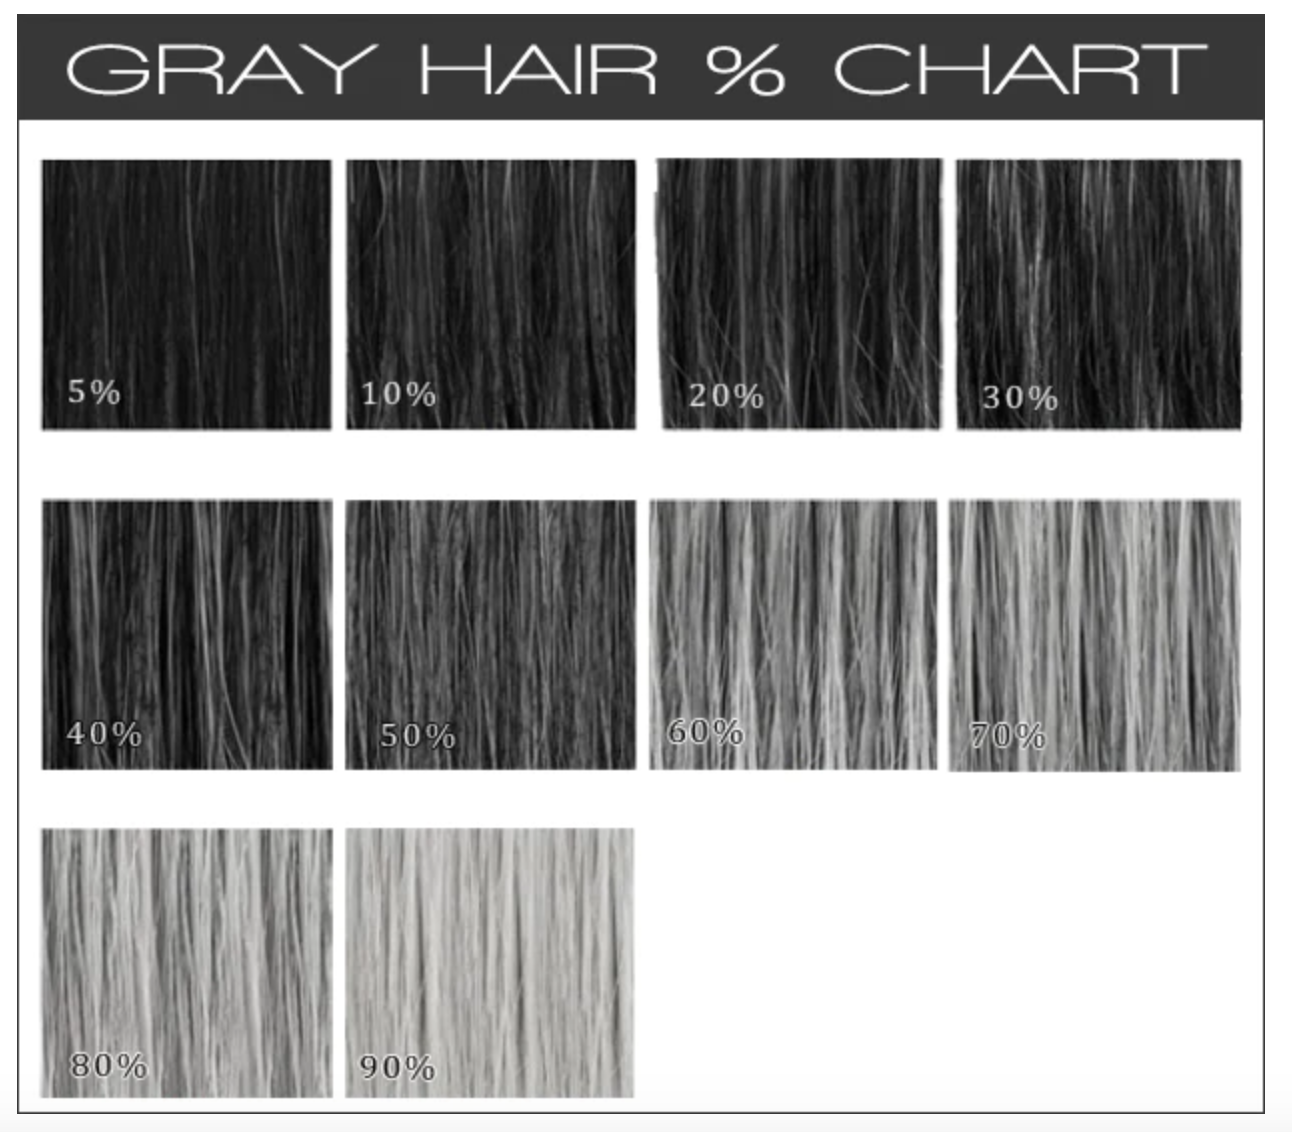 A chart visually showing the percentage of gray hair in colored hair.